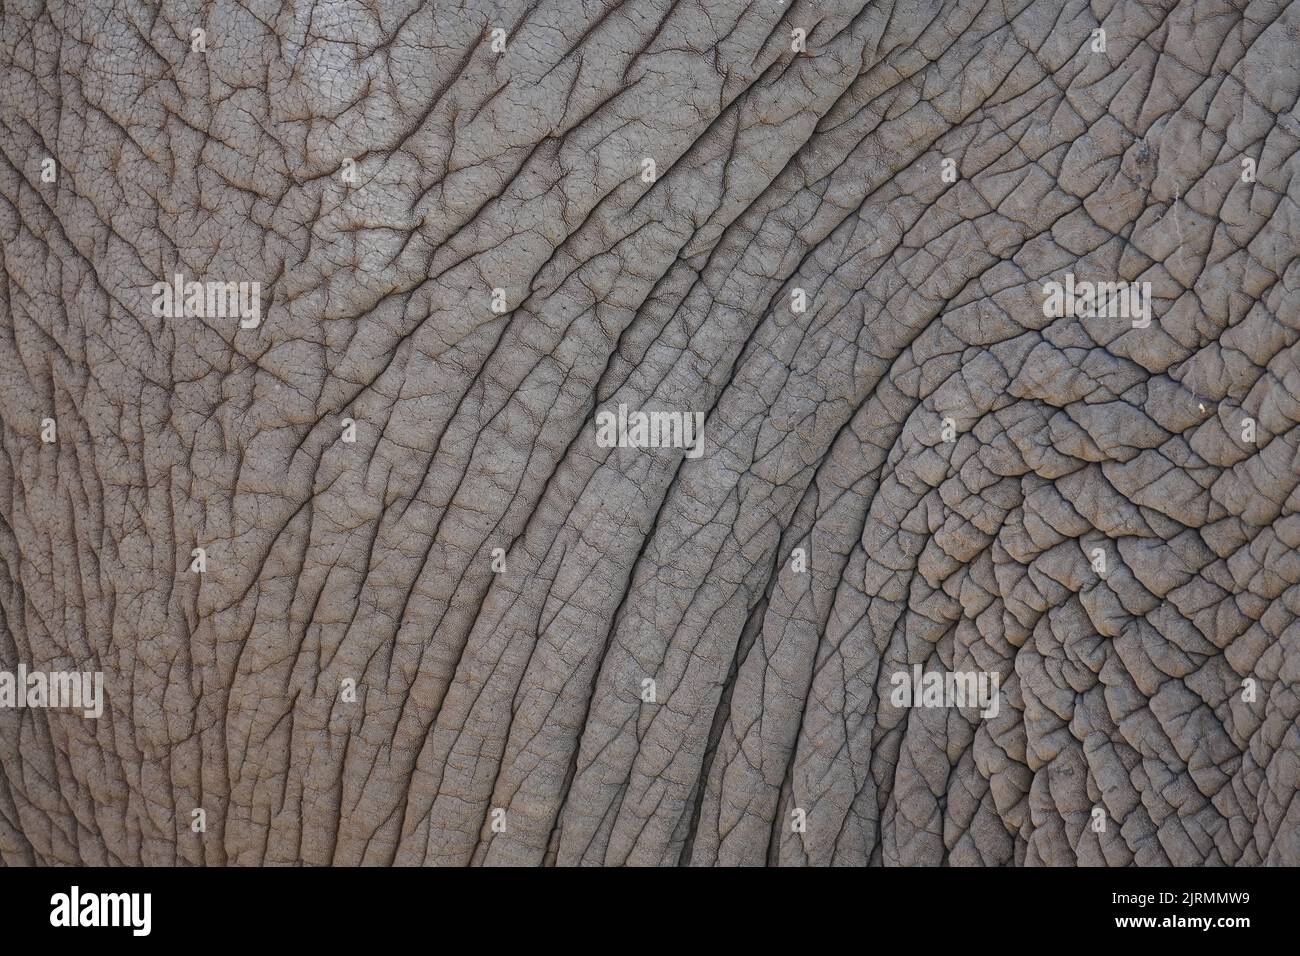 Thick leathery elephant skin in close-up. Natural background and texture. Stock Photo